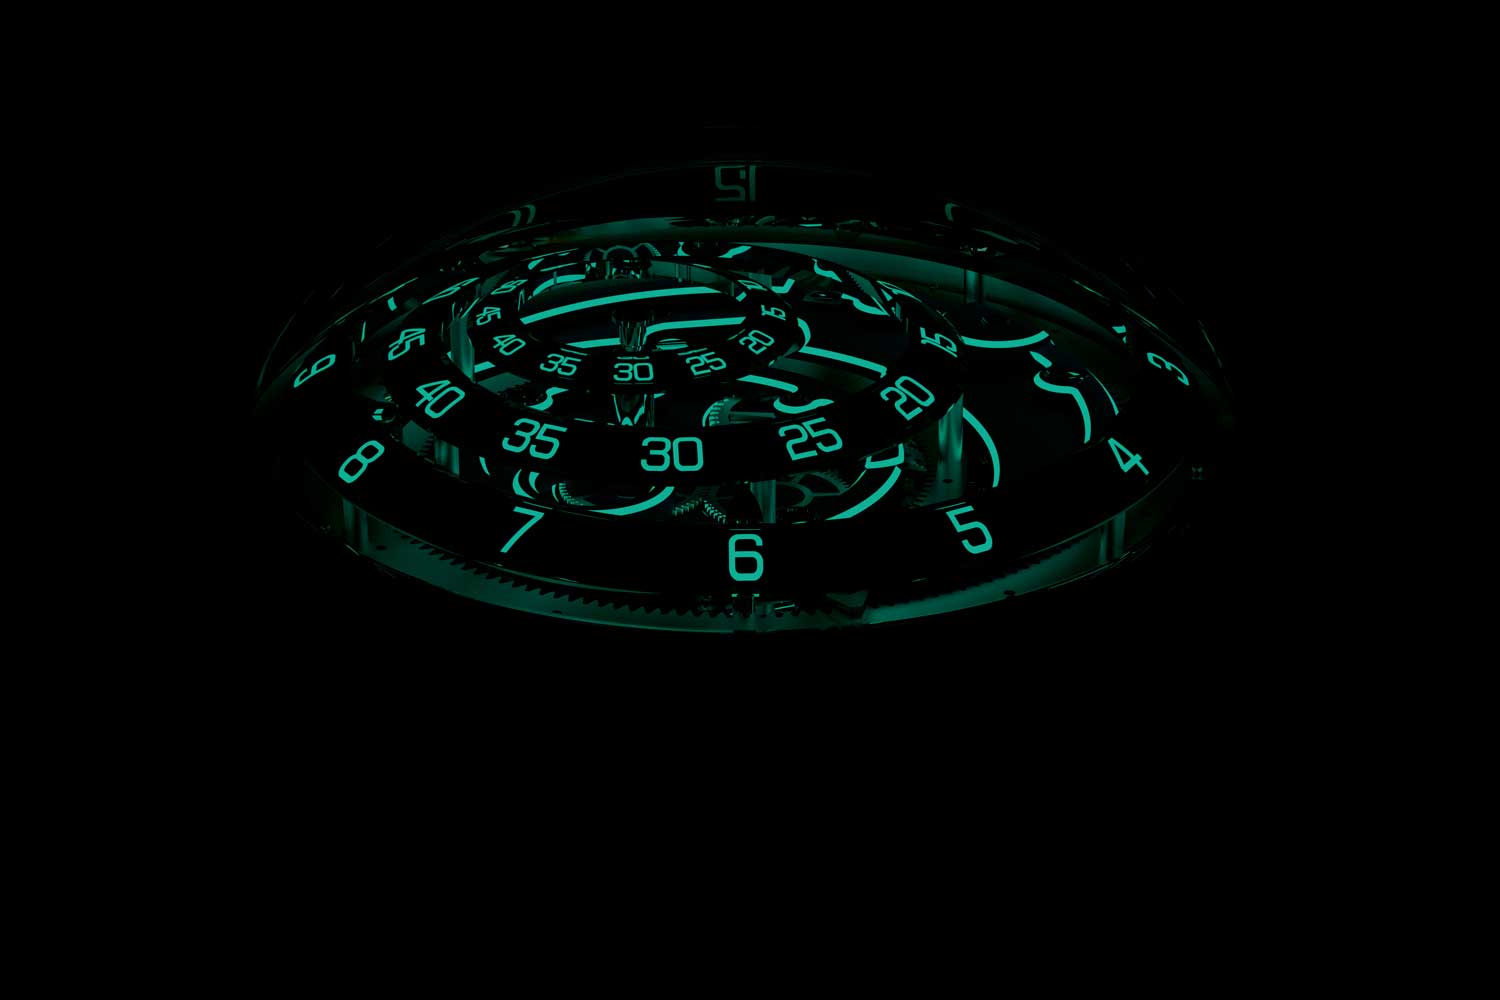 Massonneau’s design for Grail Watch has given birth to the Une Folle Soirée, a spectacular timepiece with one of the most distinctive luminous signatures ever seen on a watch